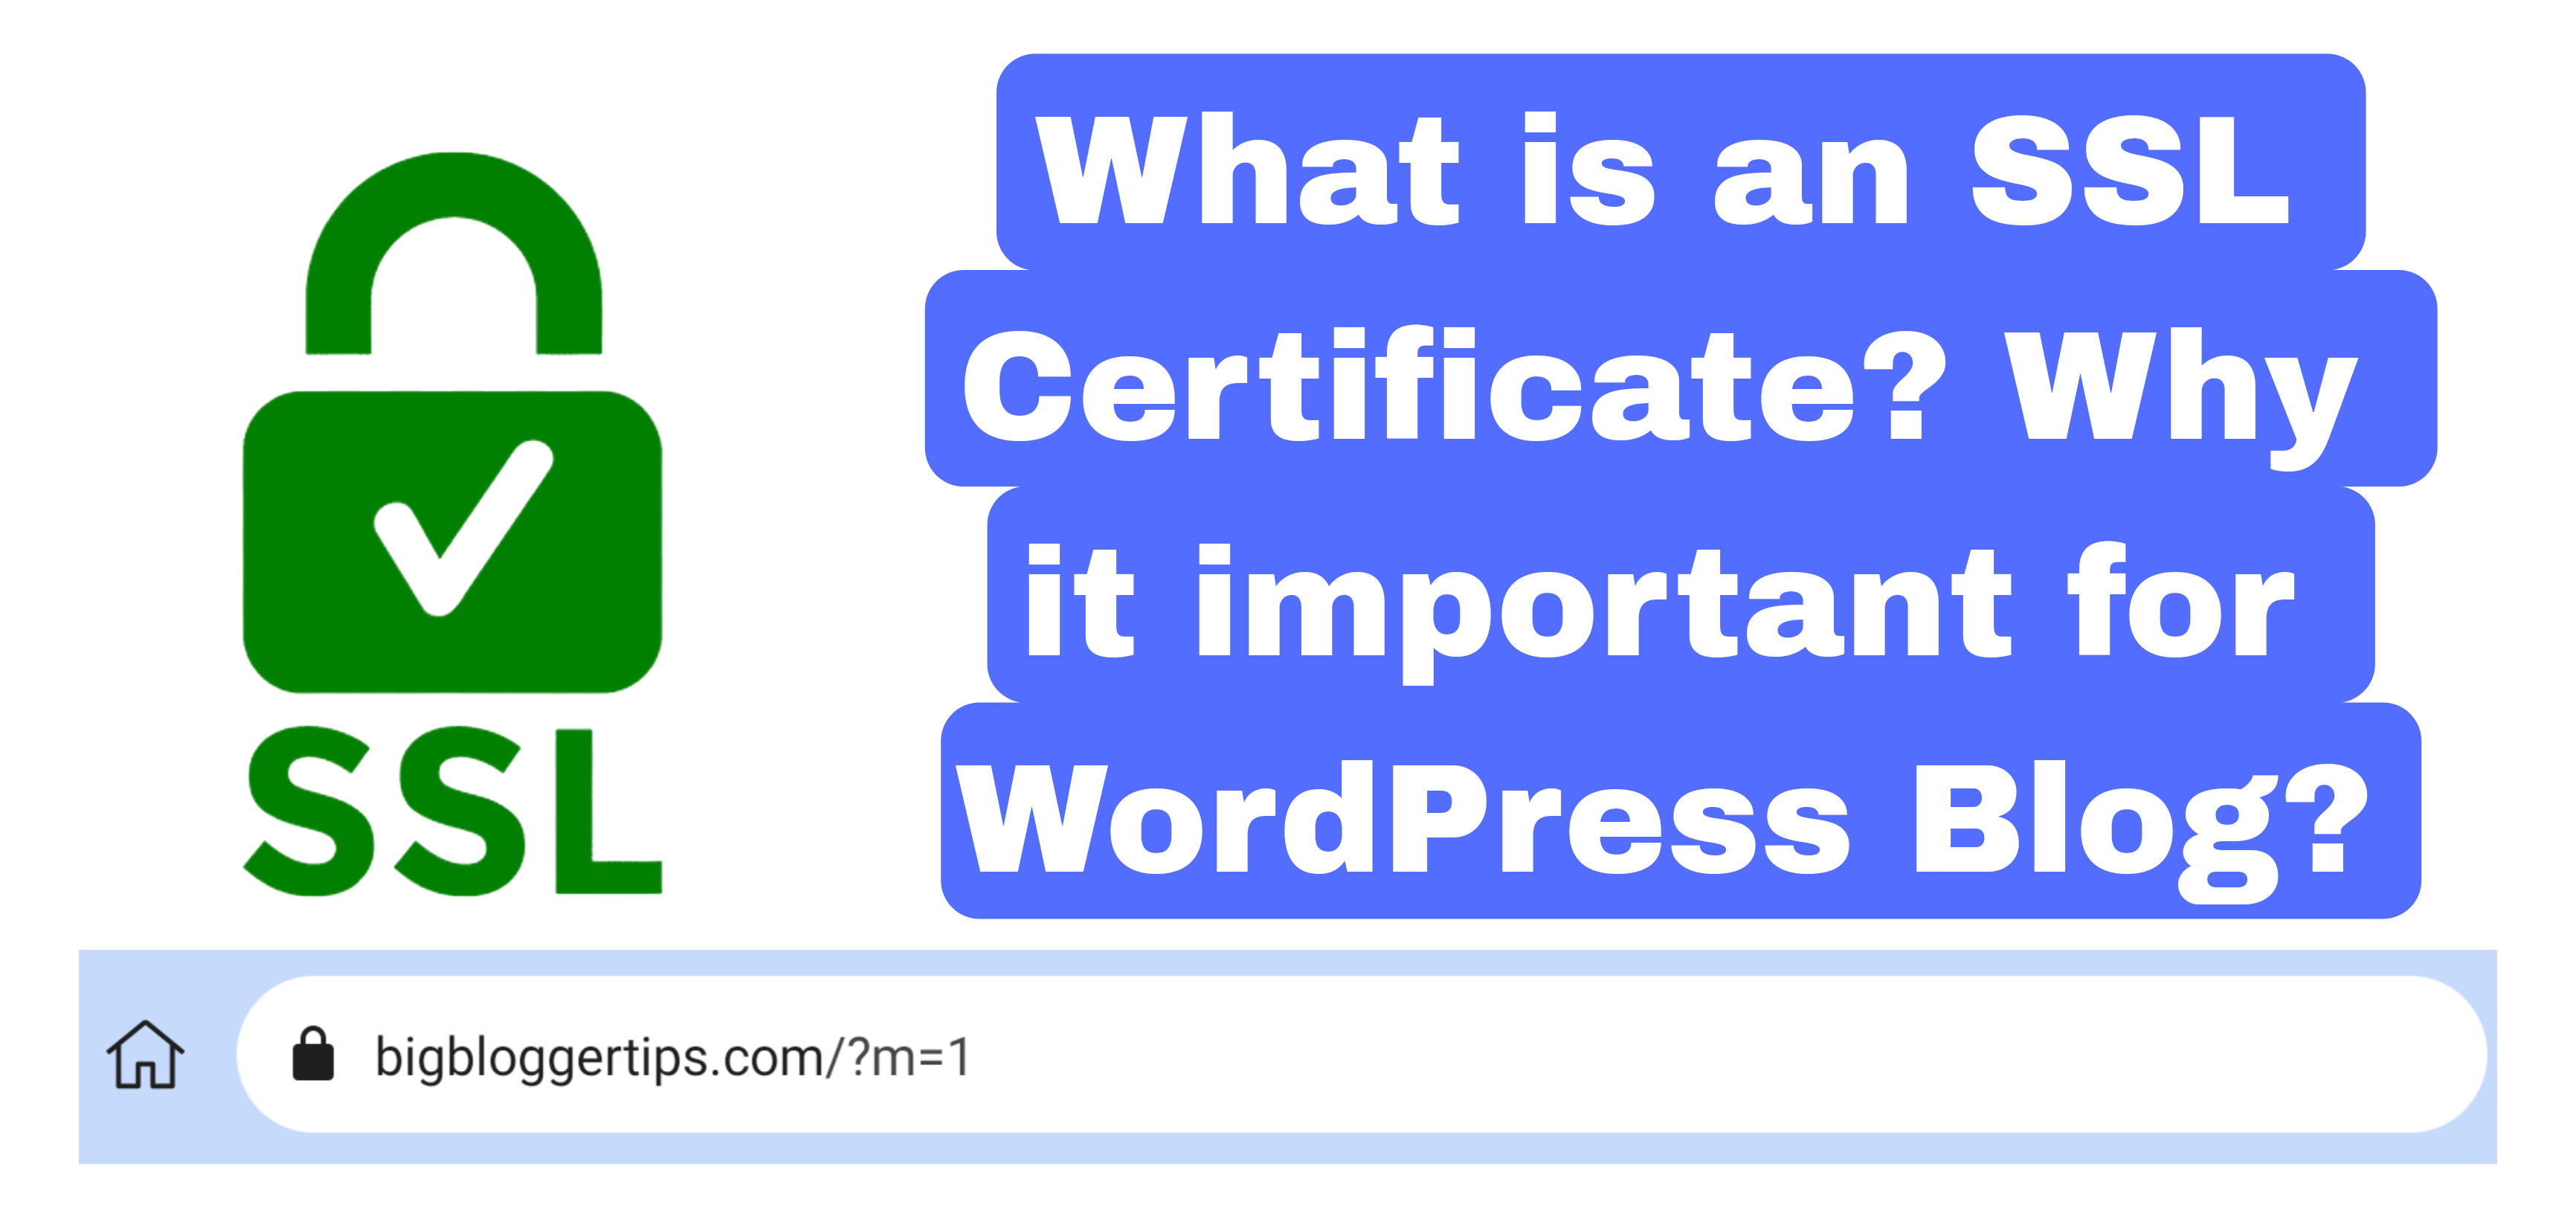 What is an SSL Certificate? Why it important for WordPress Blog?